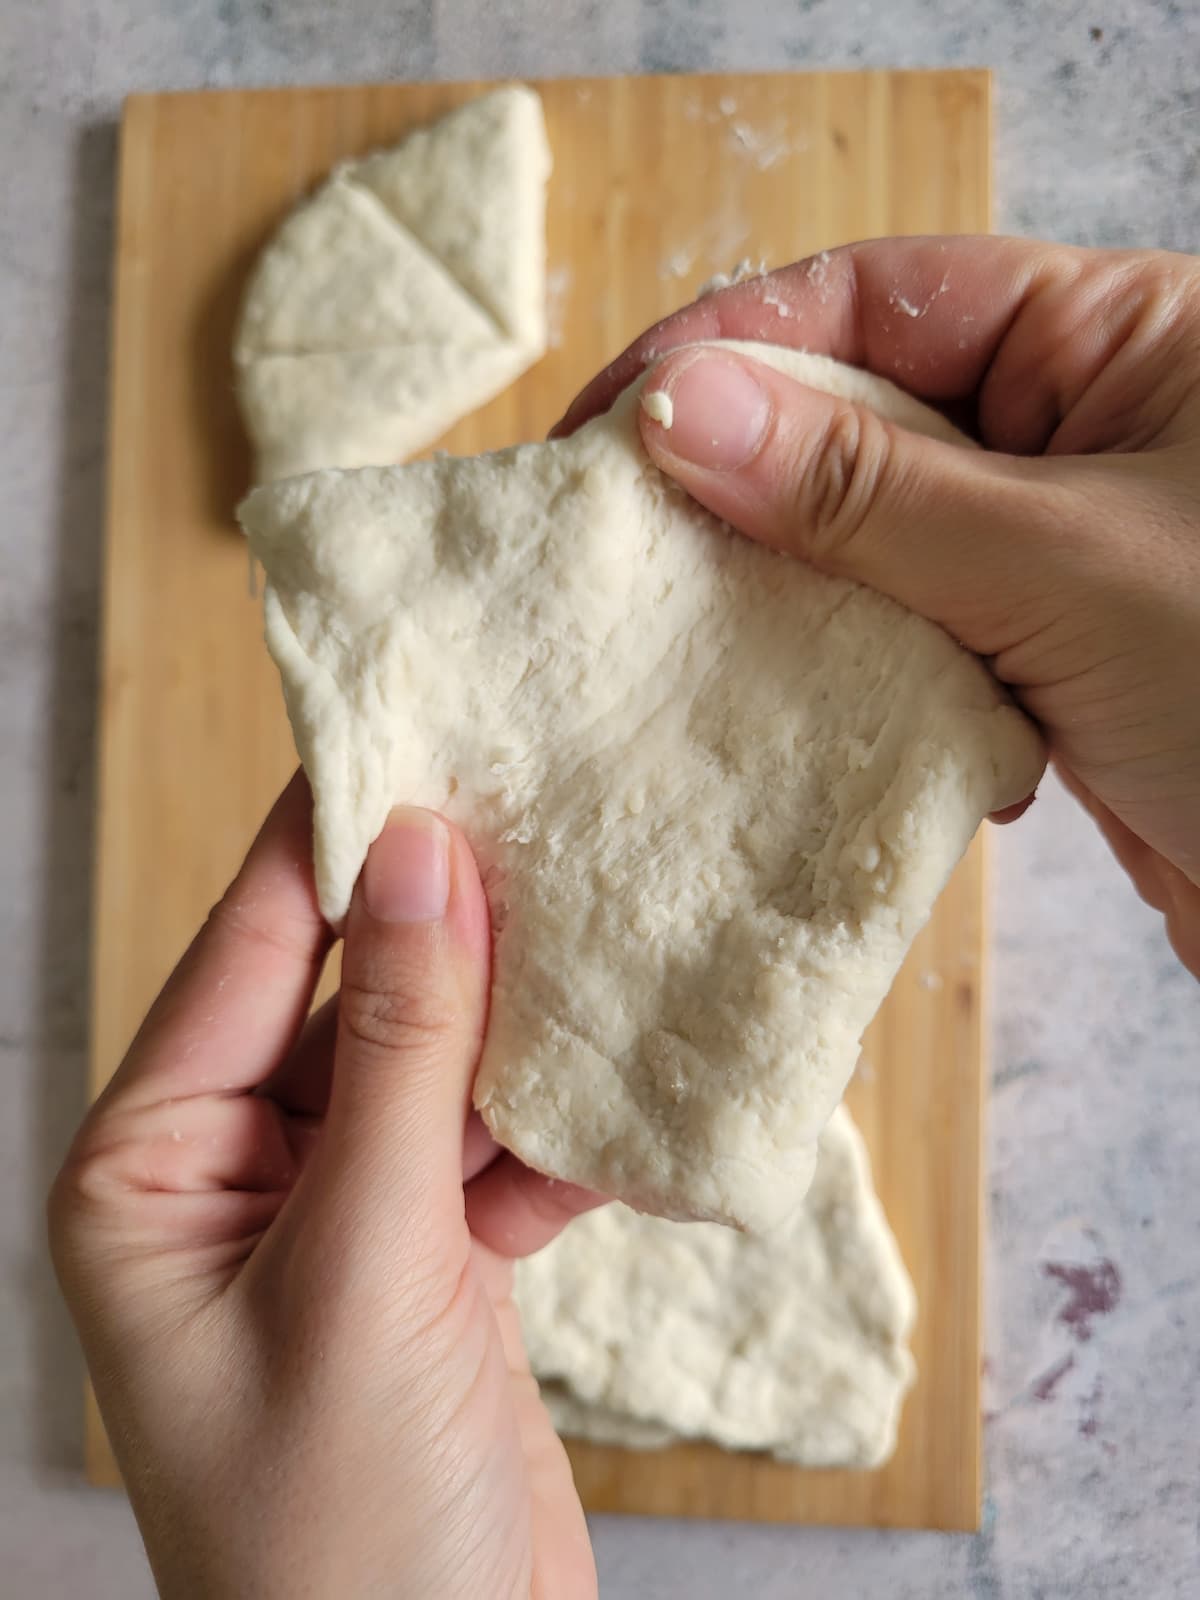 hand stretching a piece of dough over a cutting board with more pieces